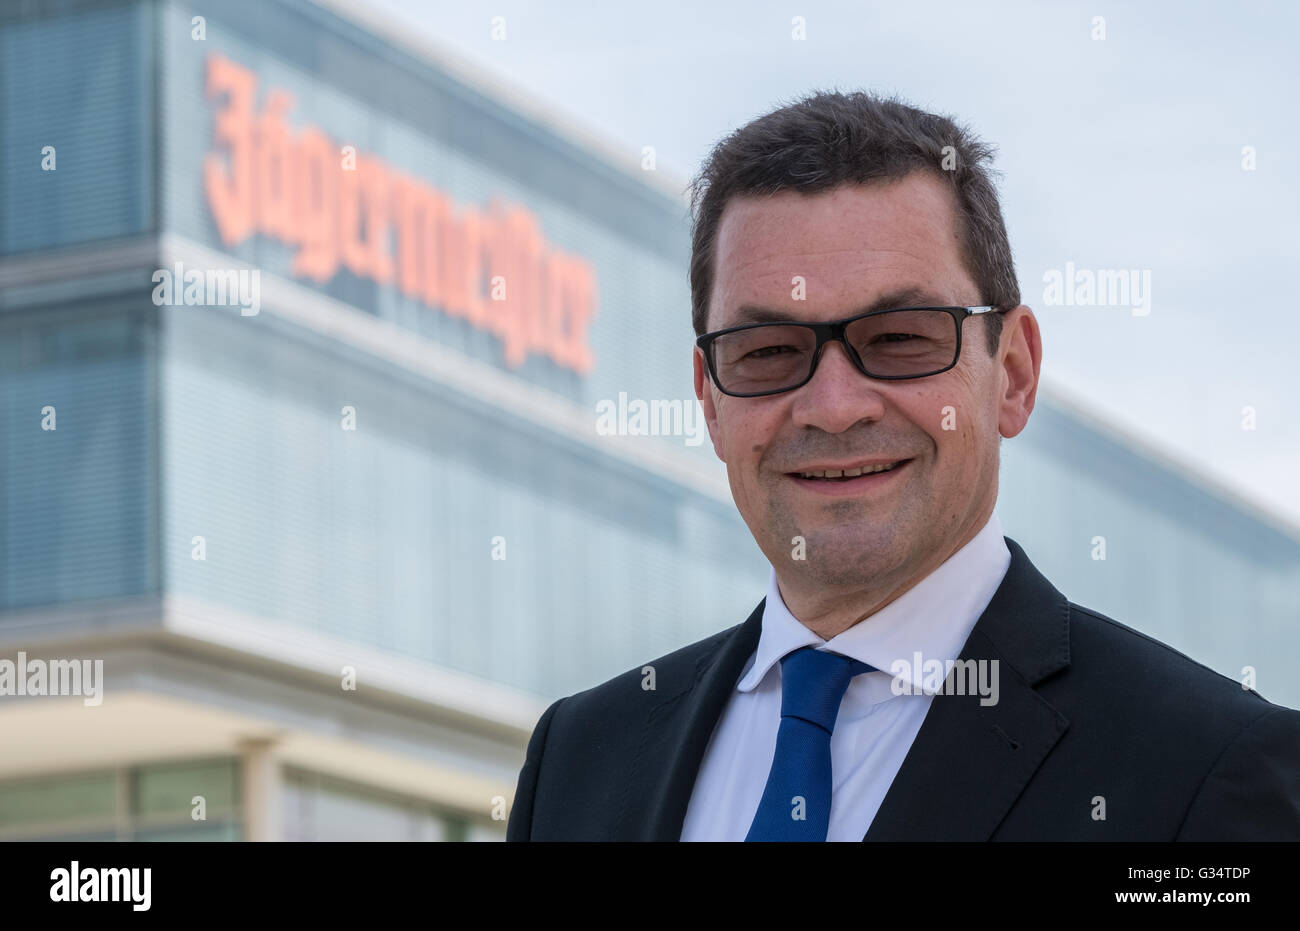 Wolfenbuettel, Germany. 07th June, 2016. Paolo Dell Antonio, spokesman of the Mast-Jaegermeister AG board, poses at the corporate headquarters of the liquor company in Wolfenbuettel, Germany, 07 June 2016. Photo: PETER STEFFEN/dpa/Alamy Live News Stock Photo